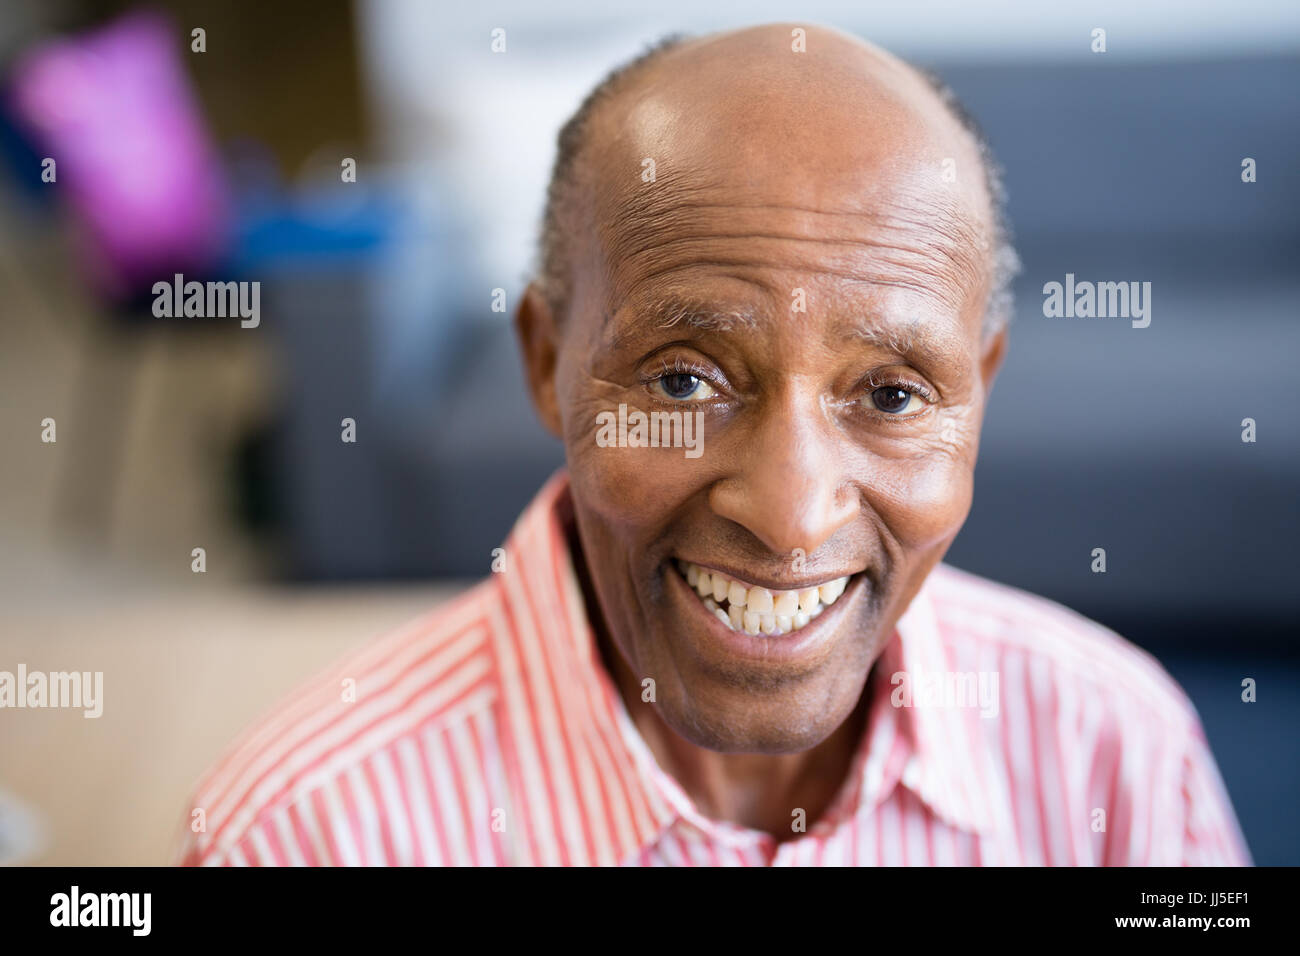 Portrait of smiling senior man with receding hairline at nursing home Stock Photo